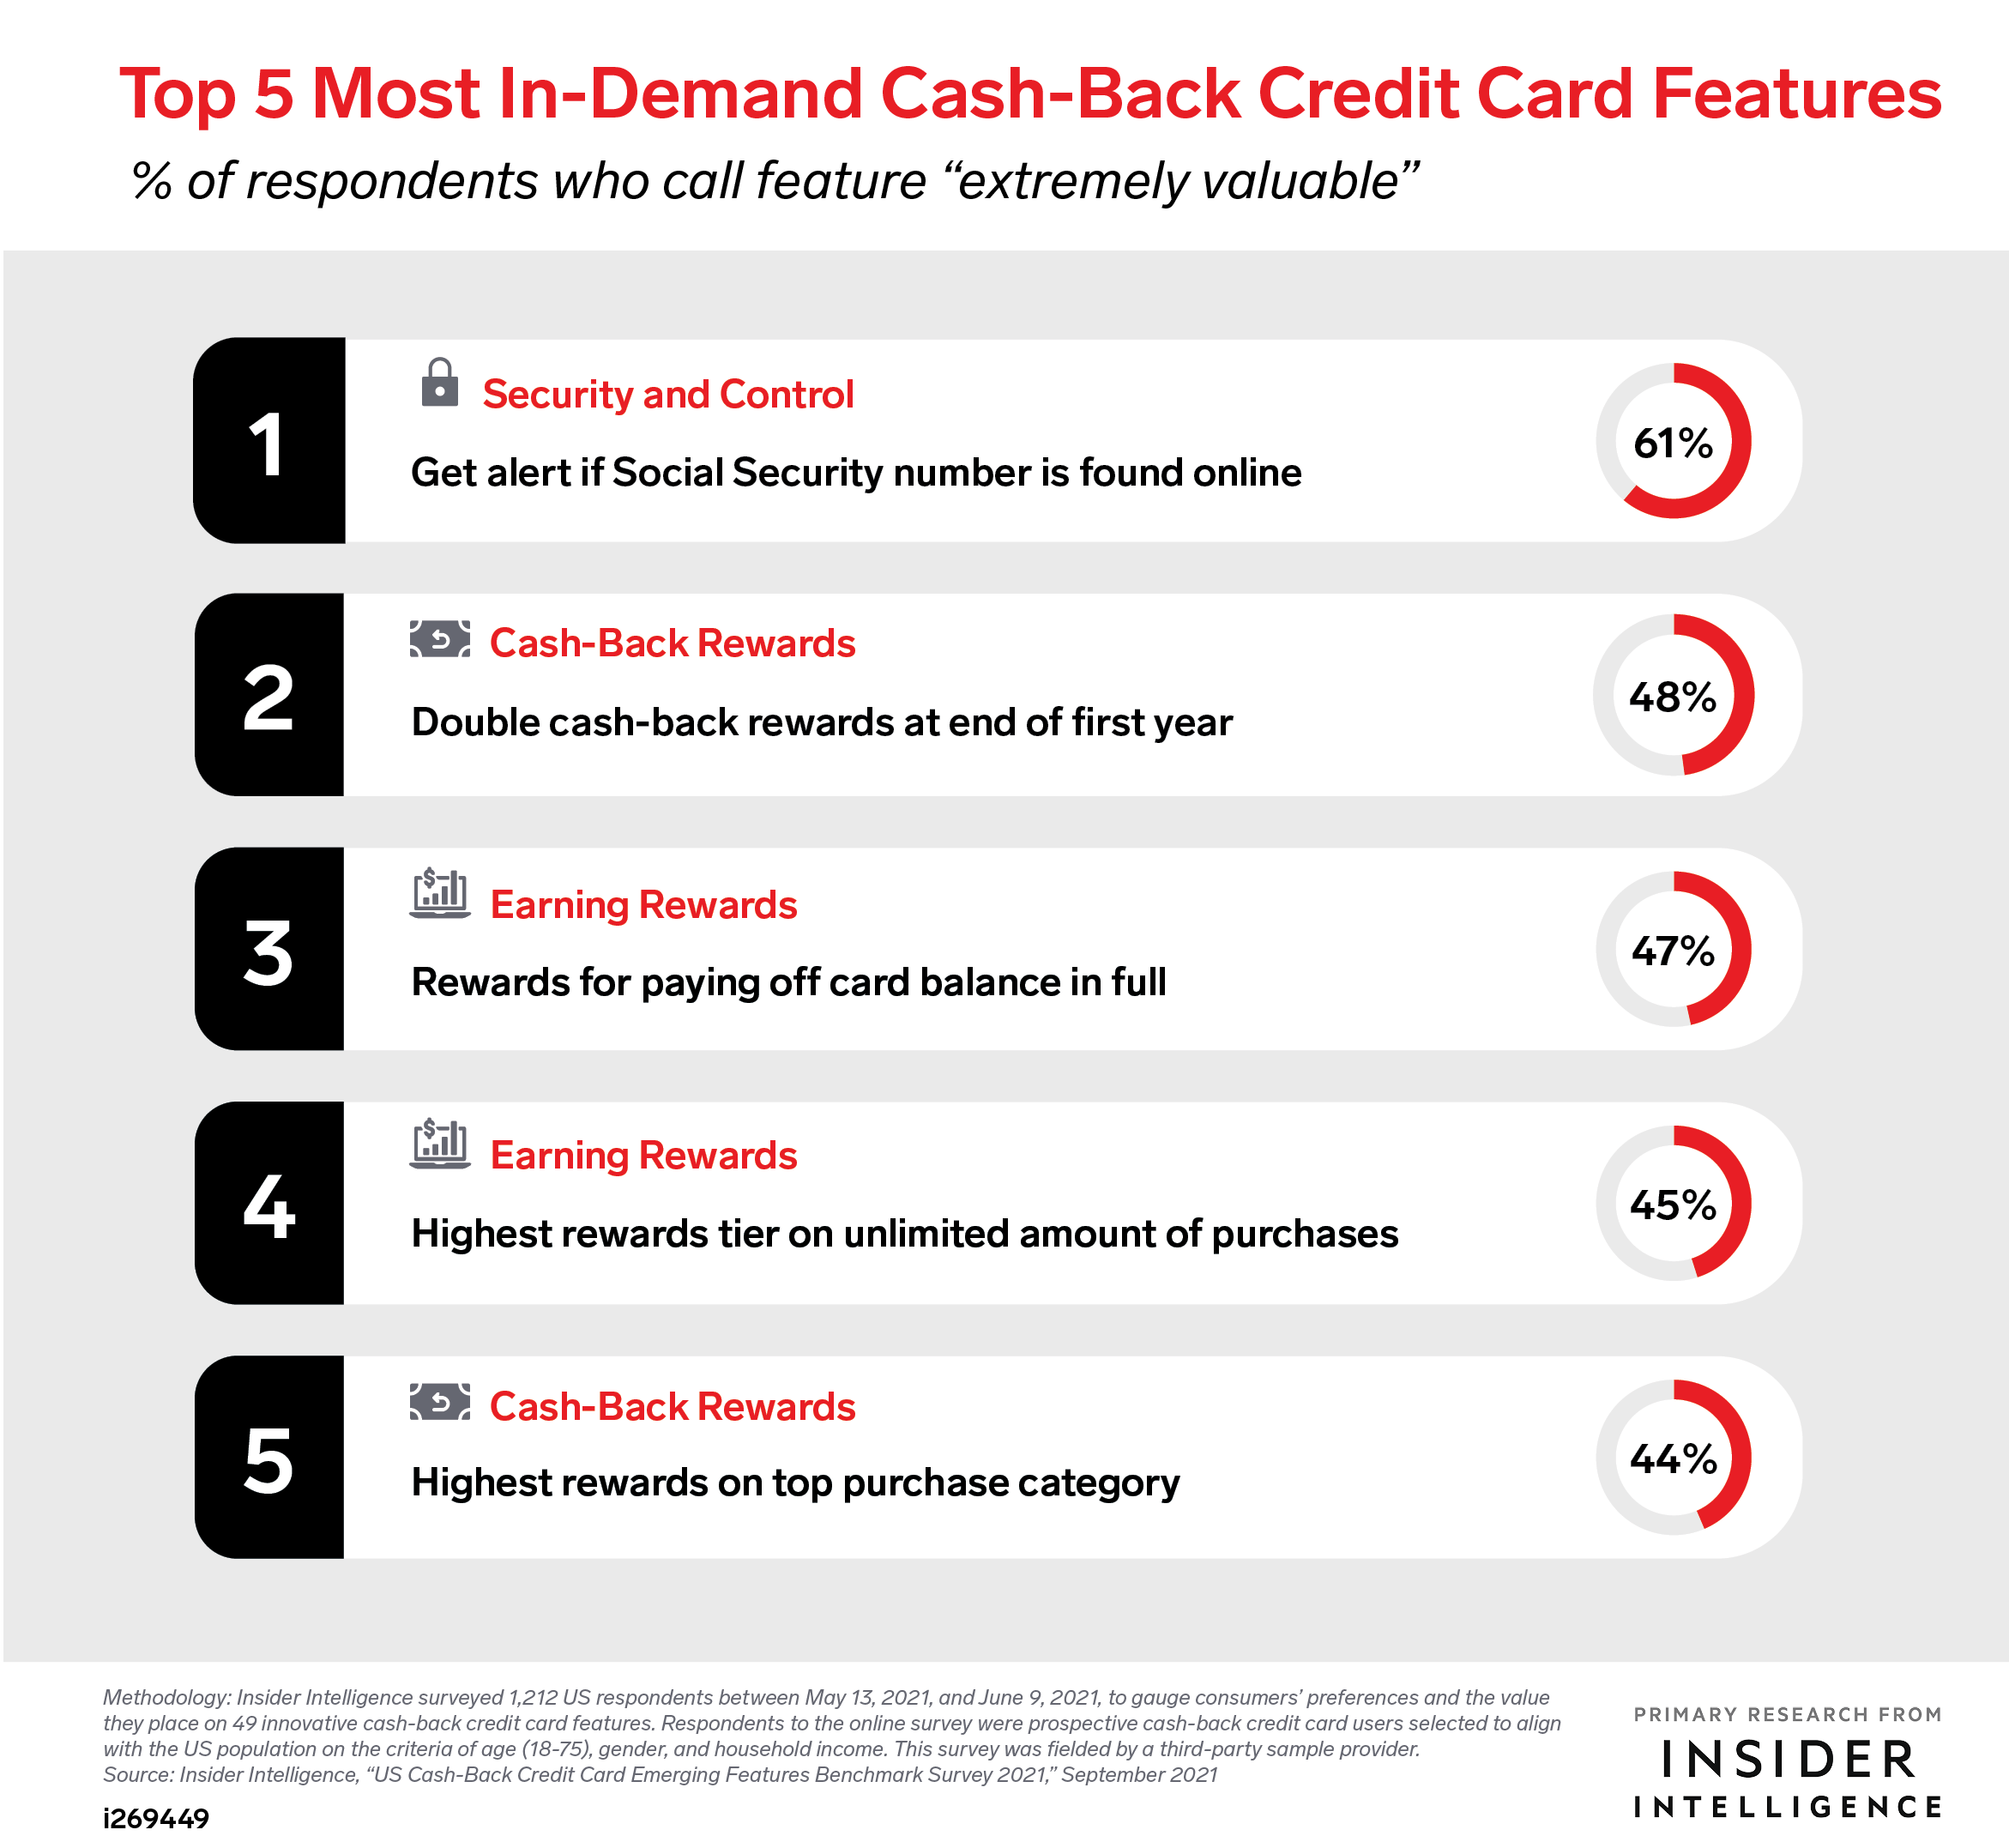 Top 5 Most In-Demand Cash-Back Credit Card Features (% of respondents who call feature 